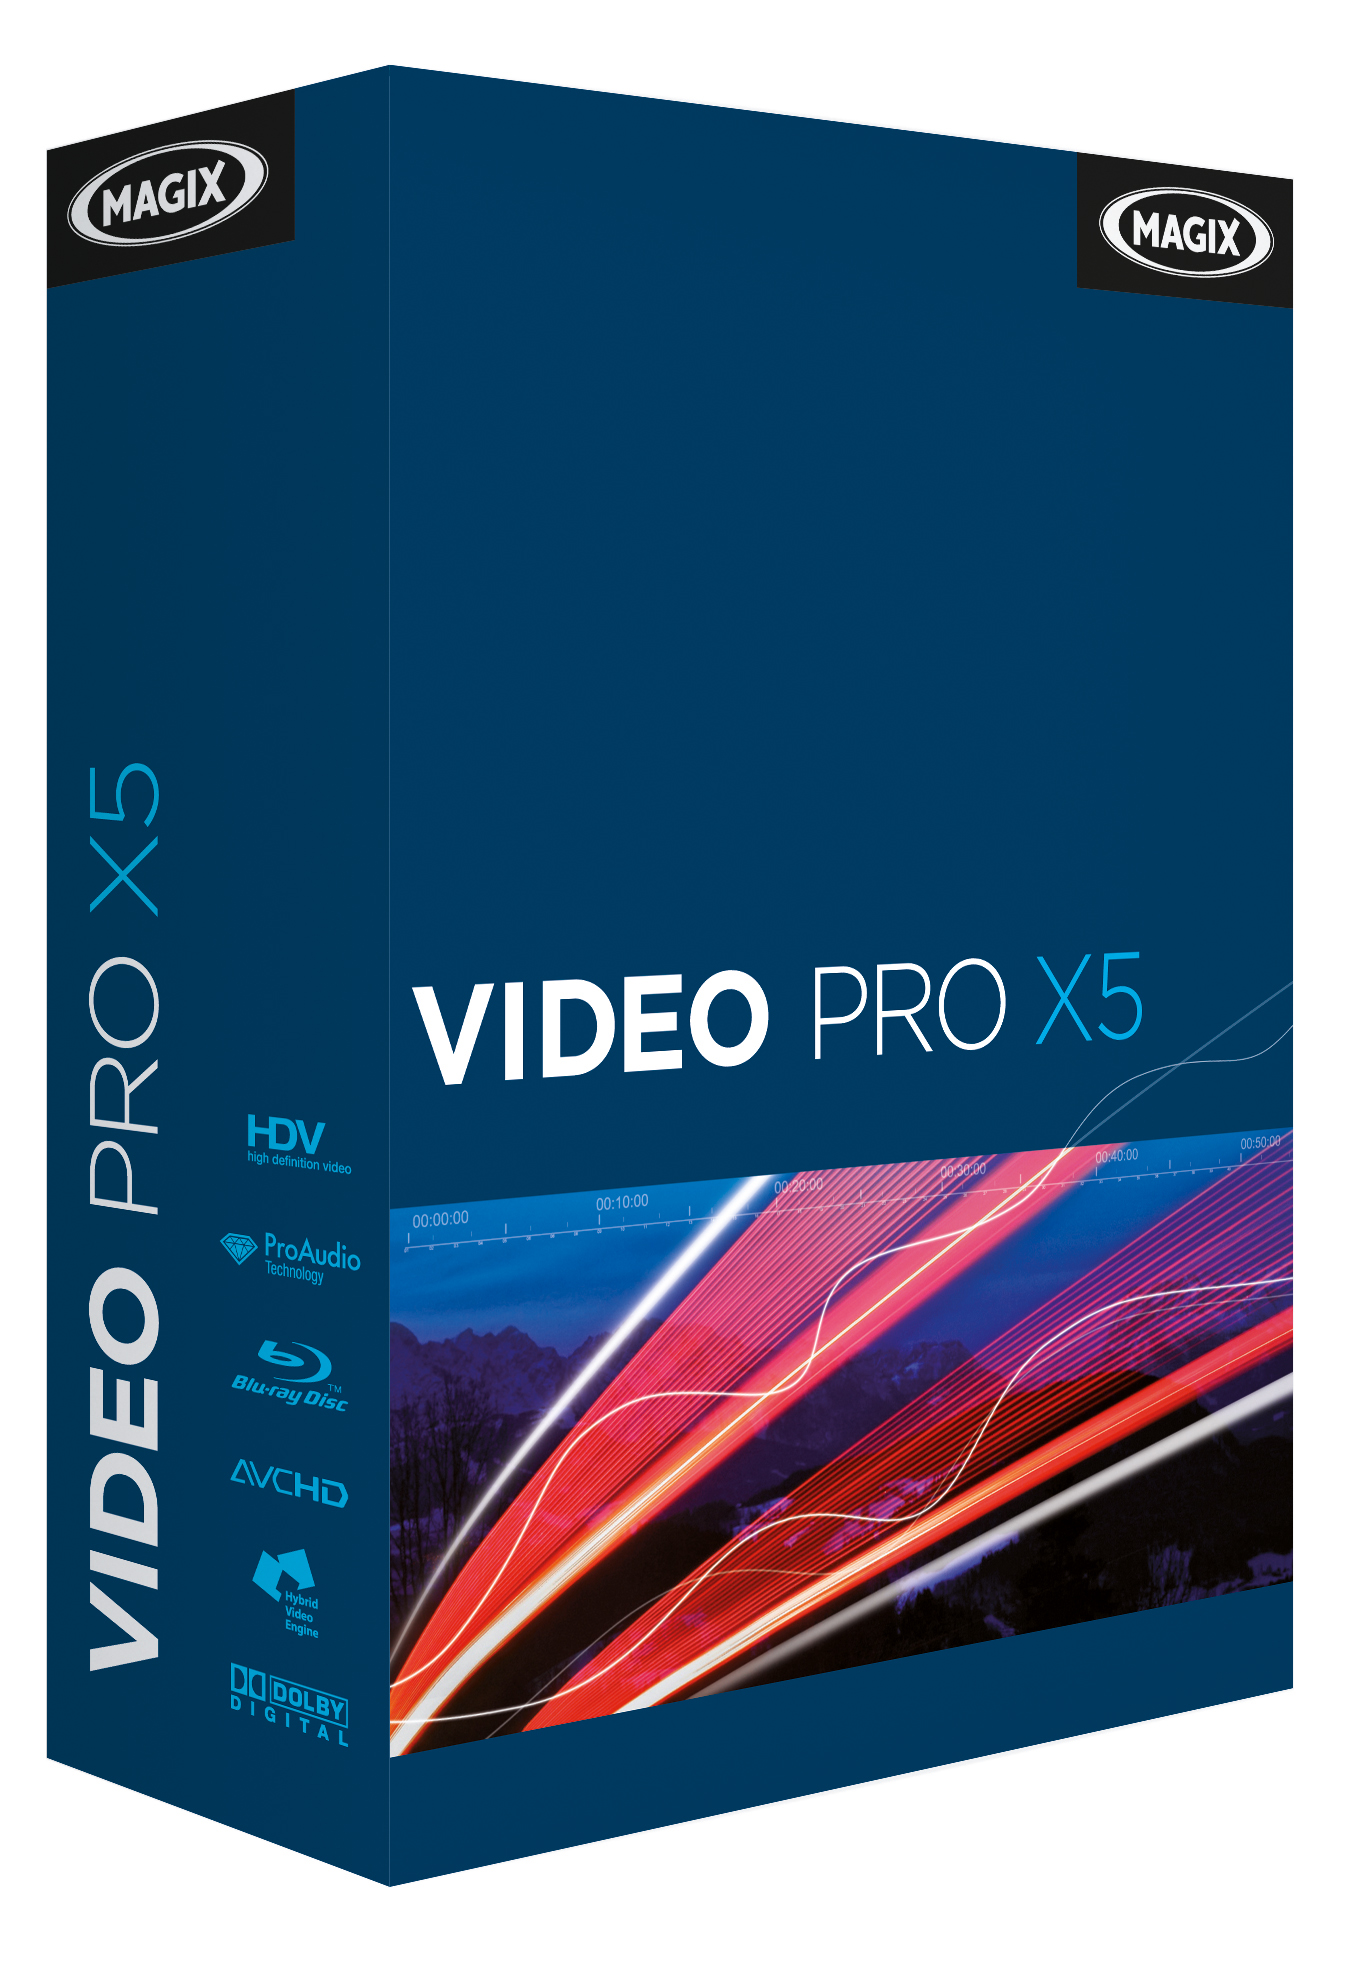 MAGIX Video Pro X15 v21.0.1.193 instal the new version for ios